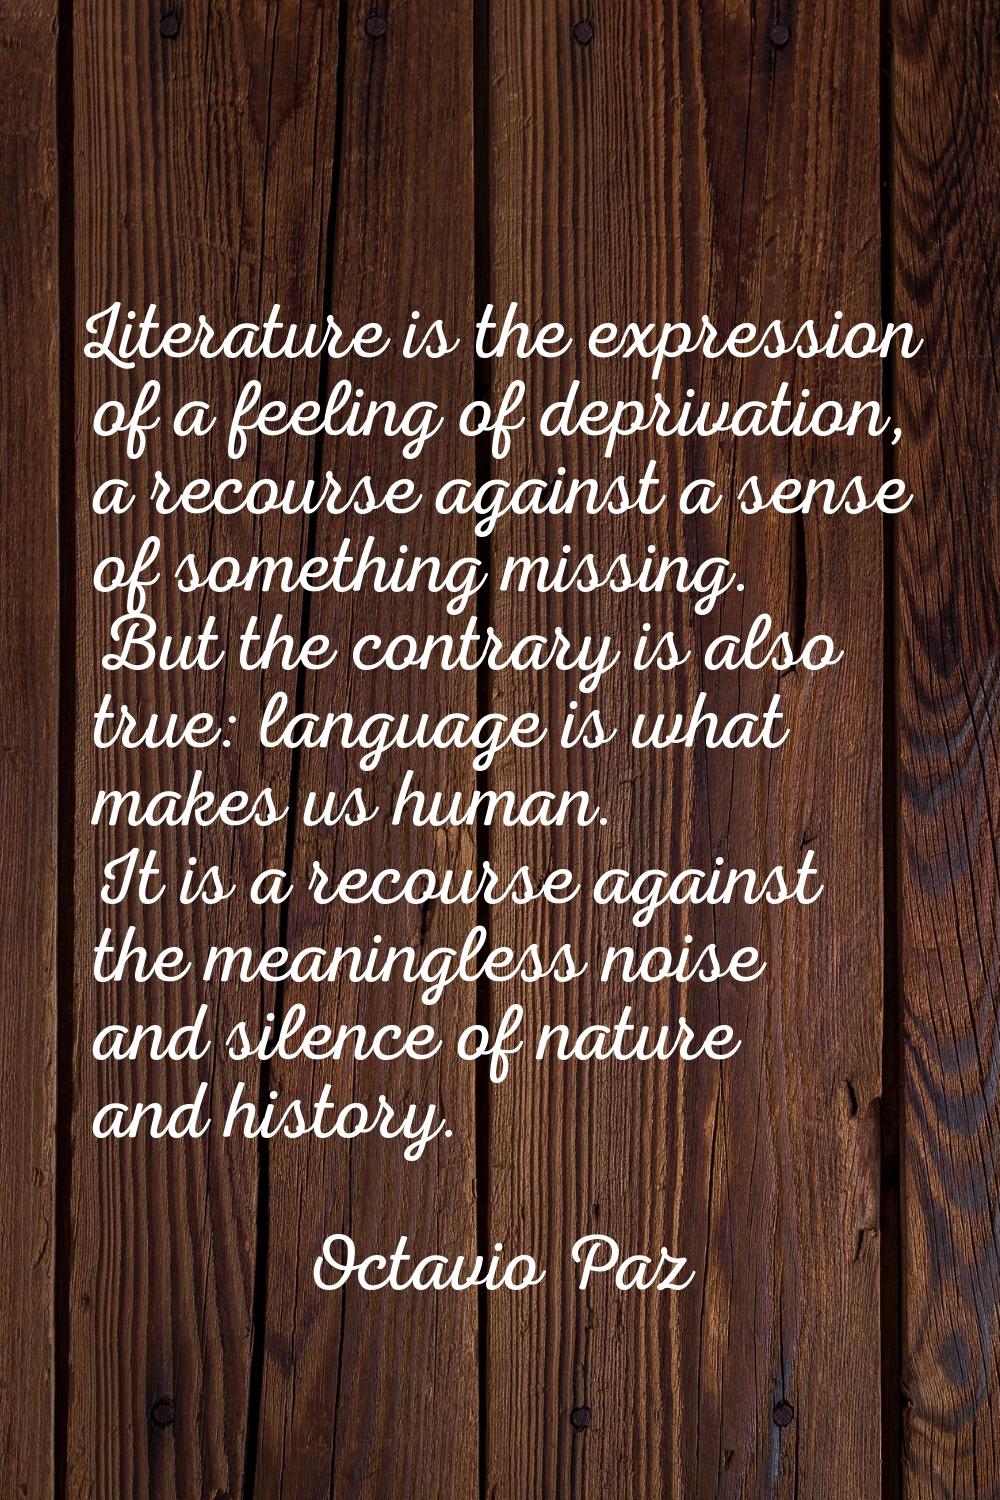 Literature is the expression of a feeling of deprivation, a recourse against a sense of something m